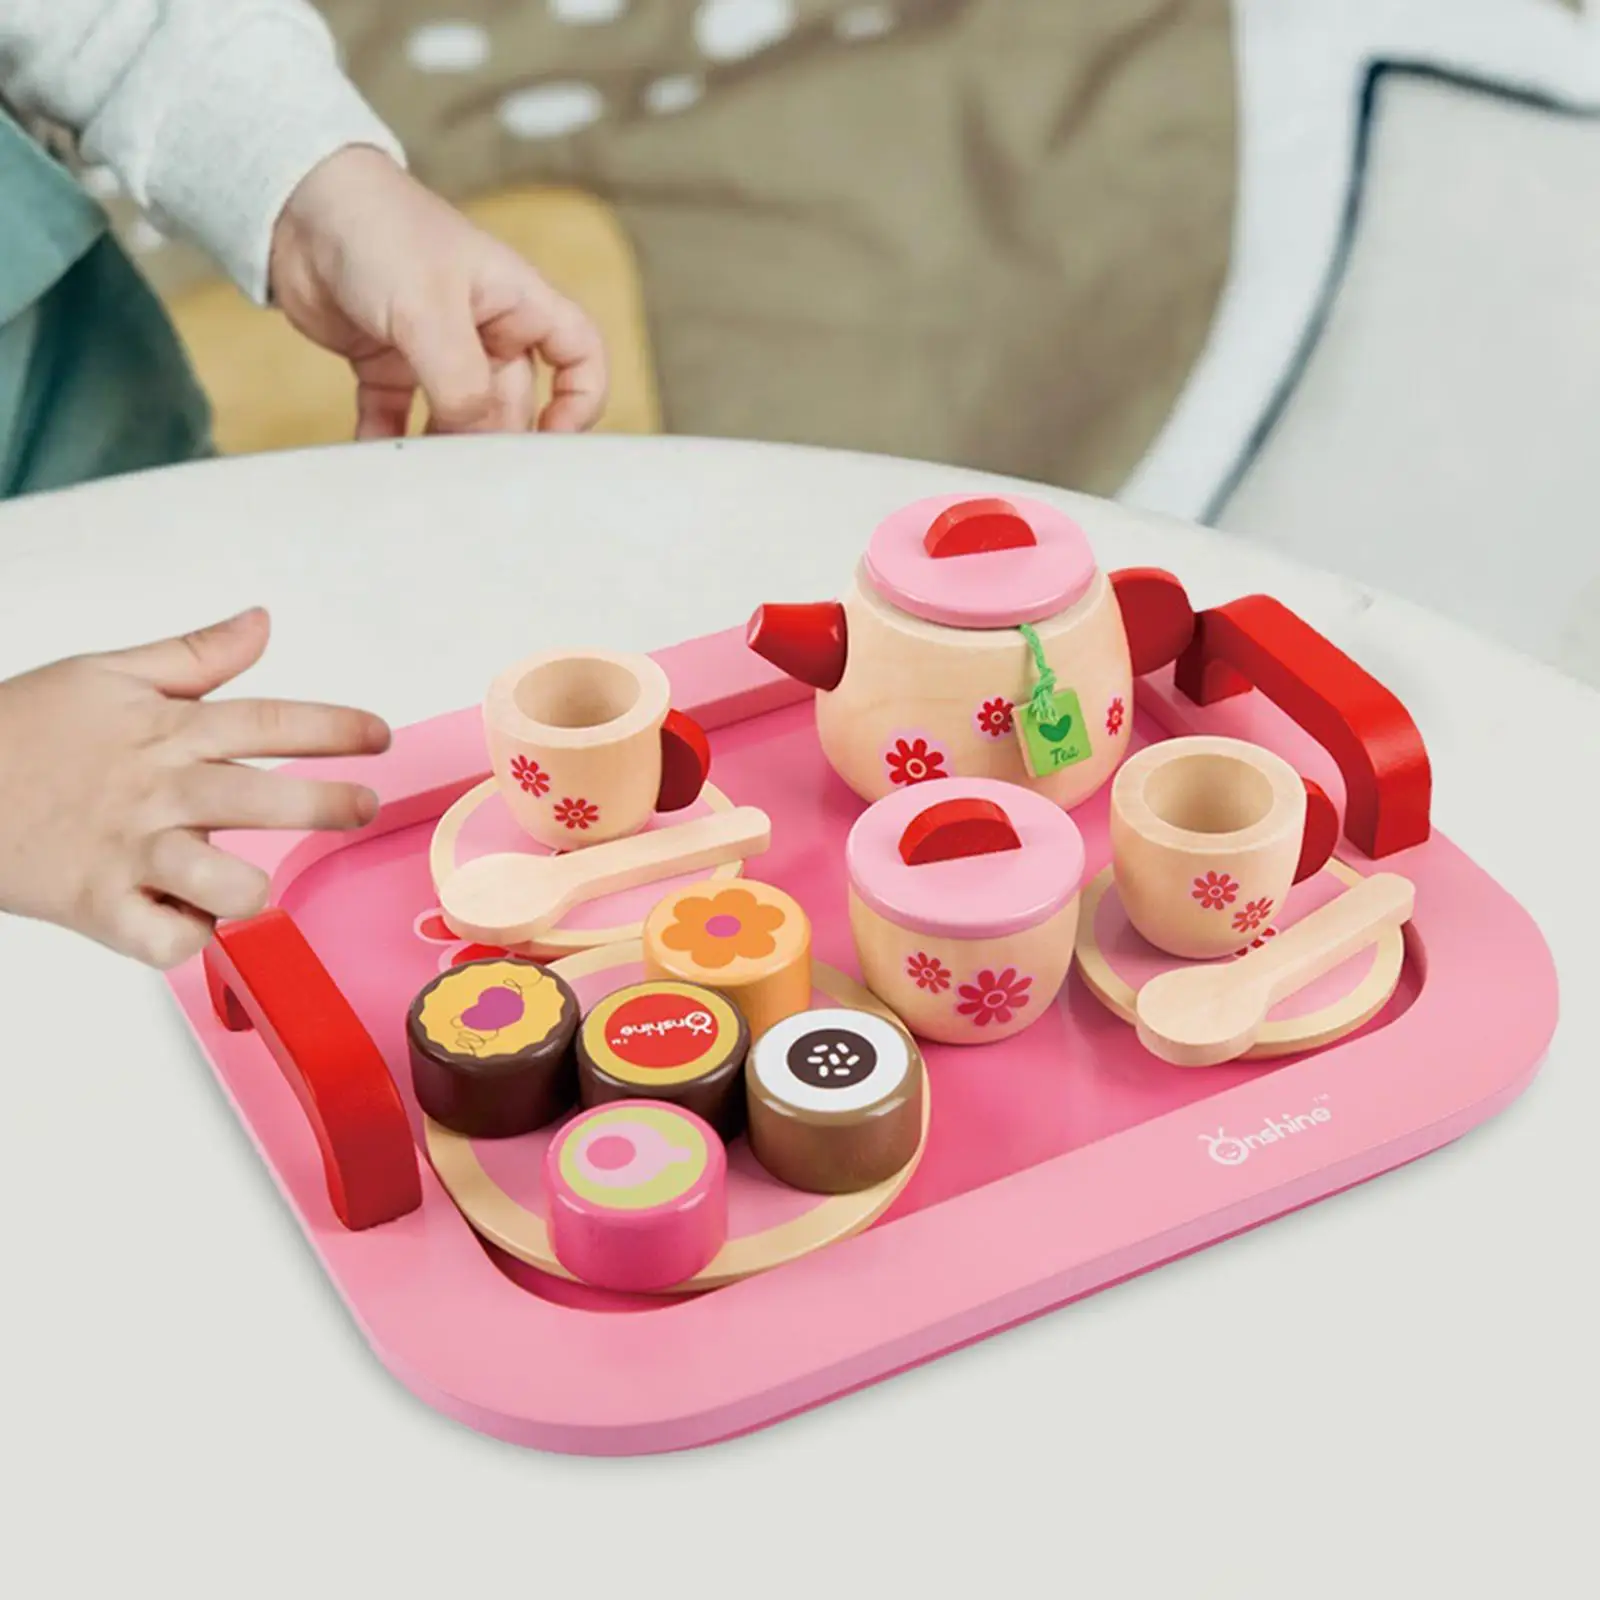 Play Tea Party Accessories Dessert Food Playset Interactive for Little Girls